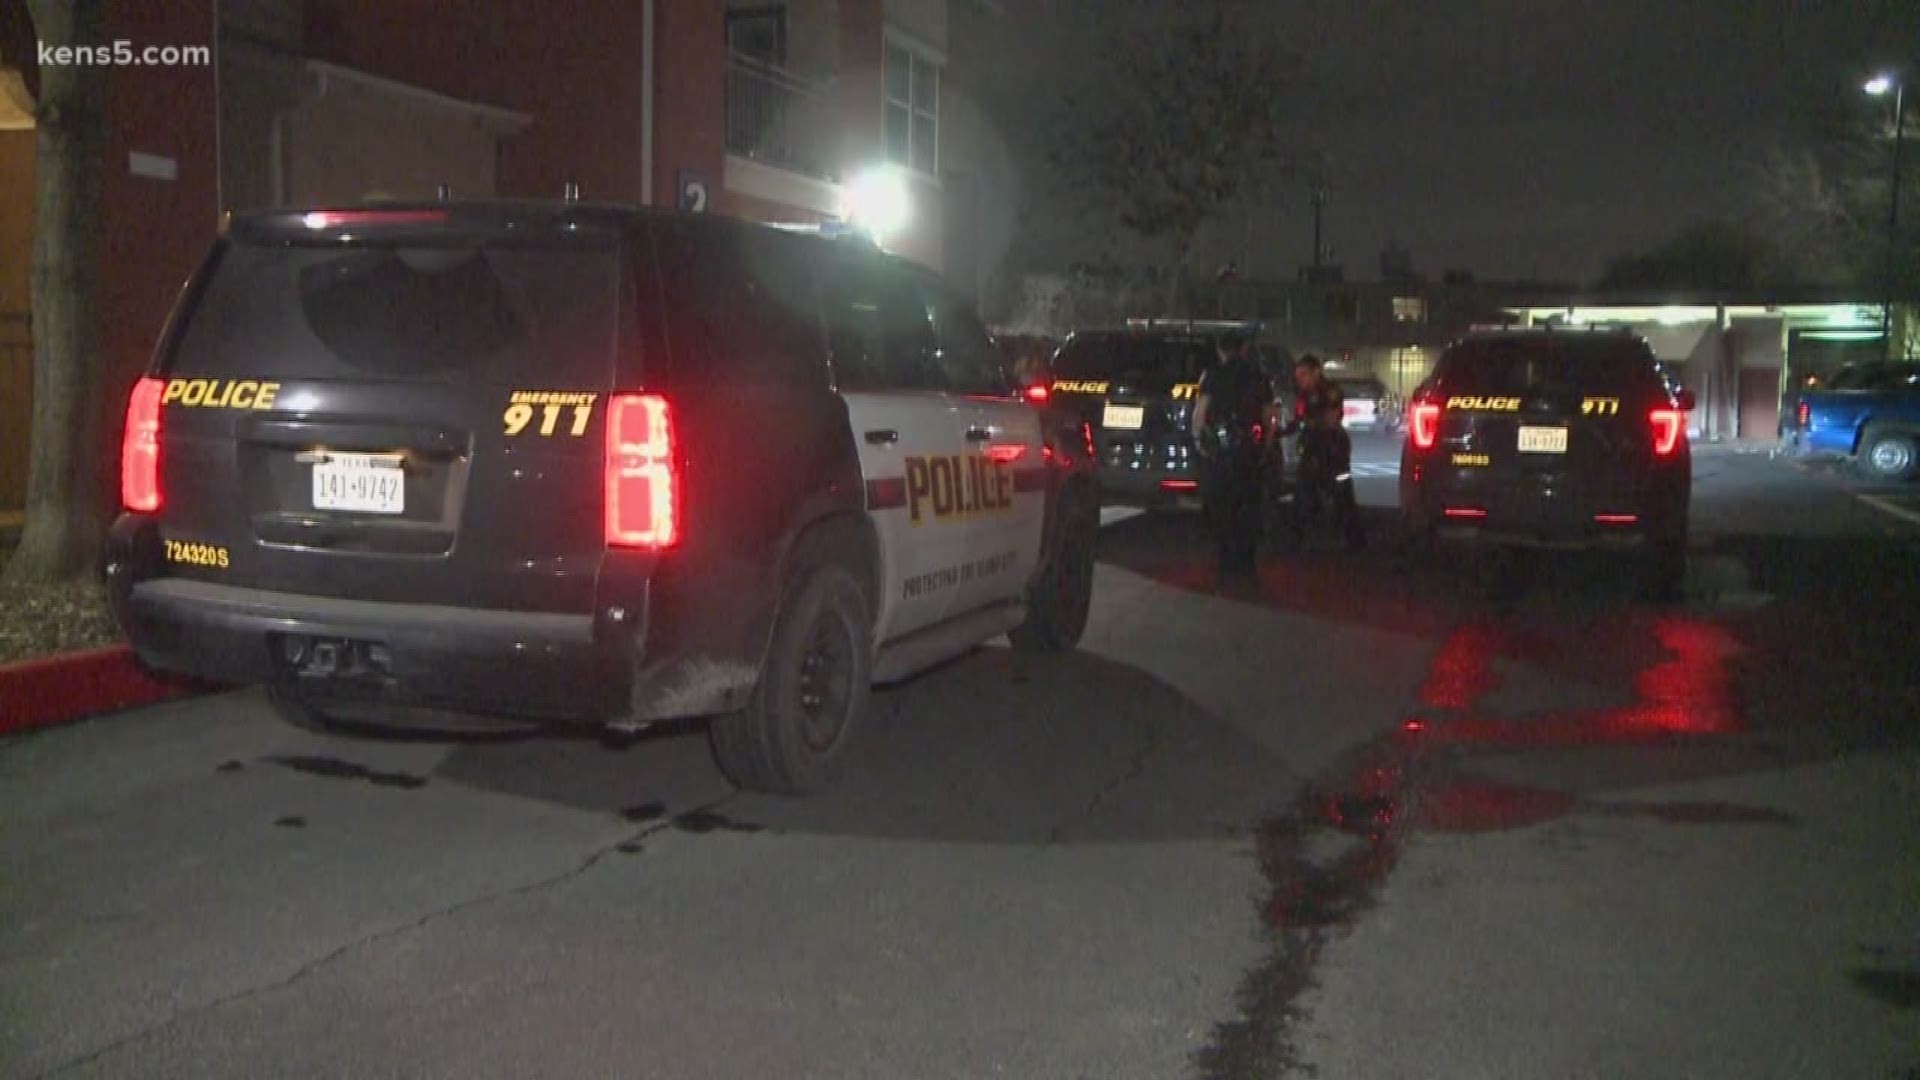 Police say a man attacked his father with a machete at an apartment home on Southwest Military Drive.